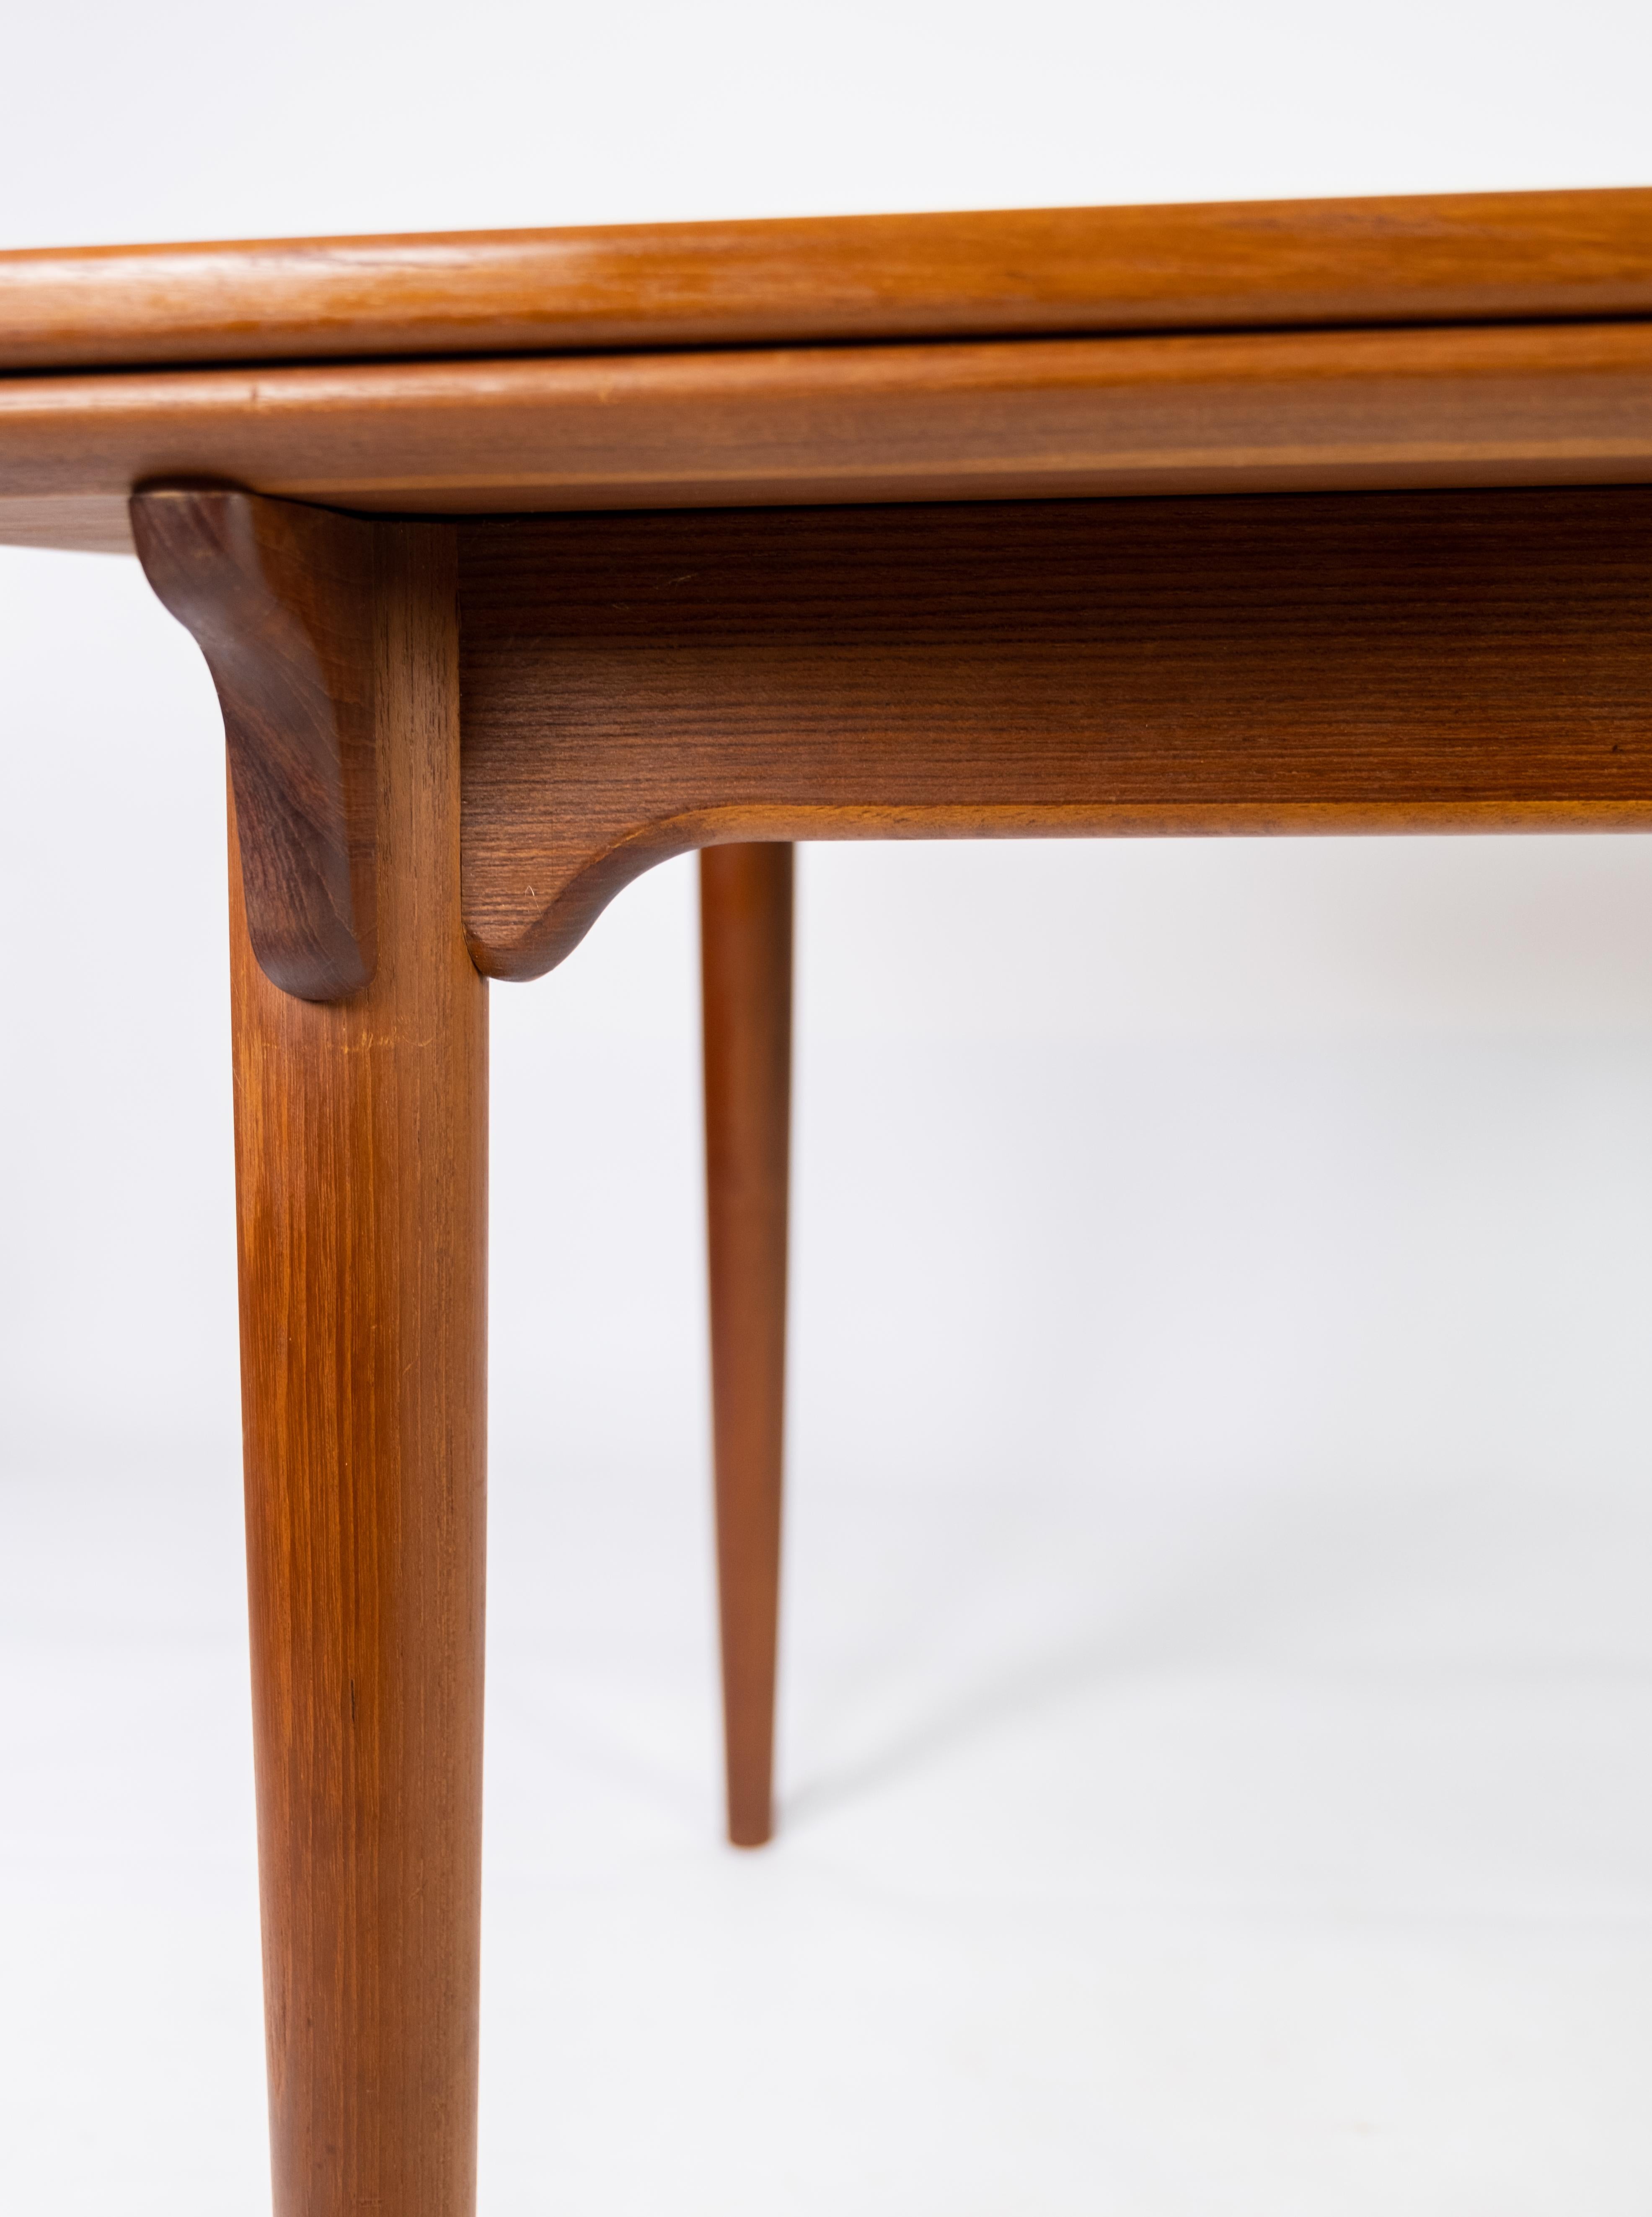 Dining Table Made In Teak With Extentions, Danish Design From 1960s For Sale 5